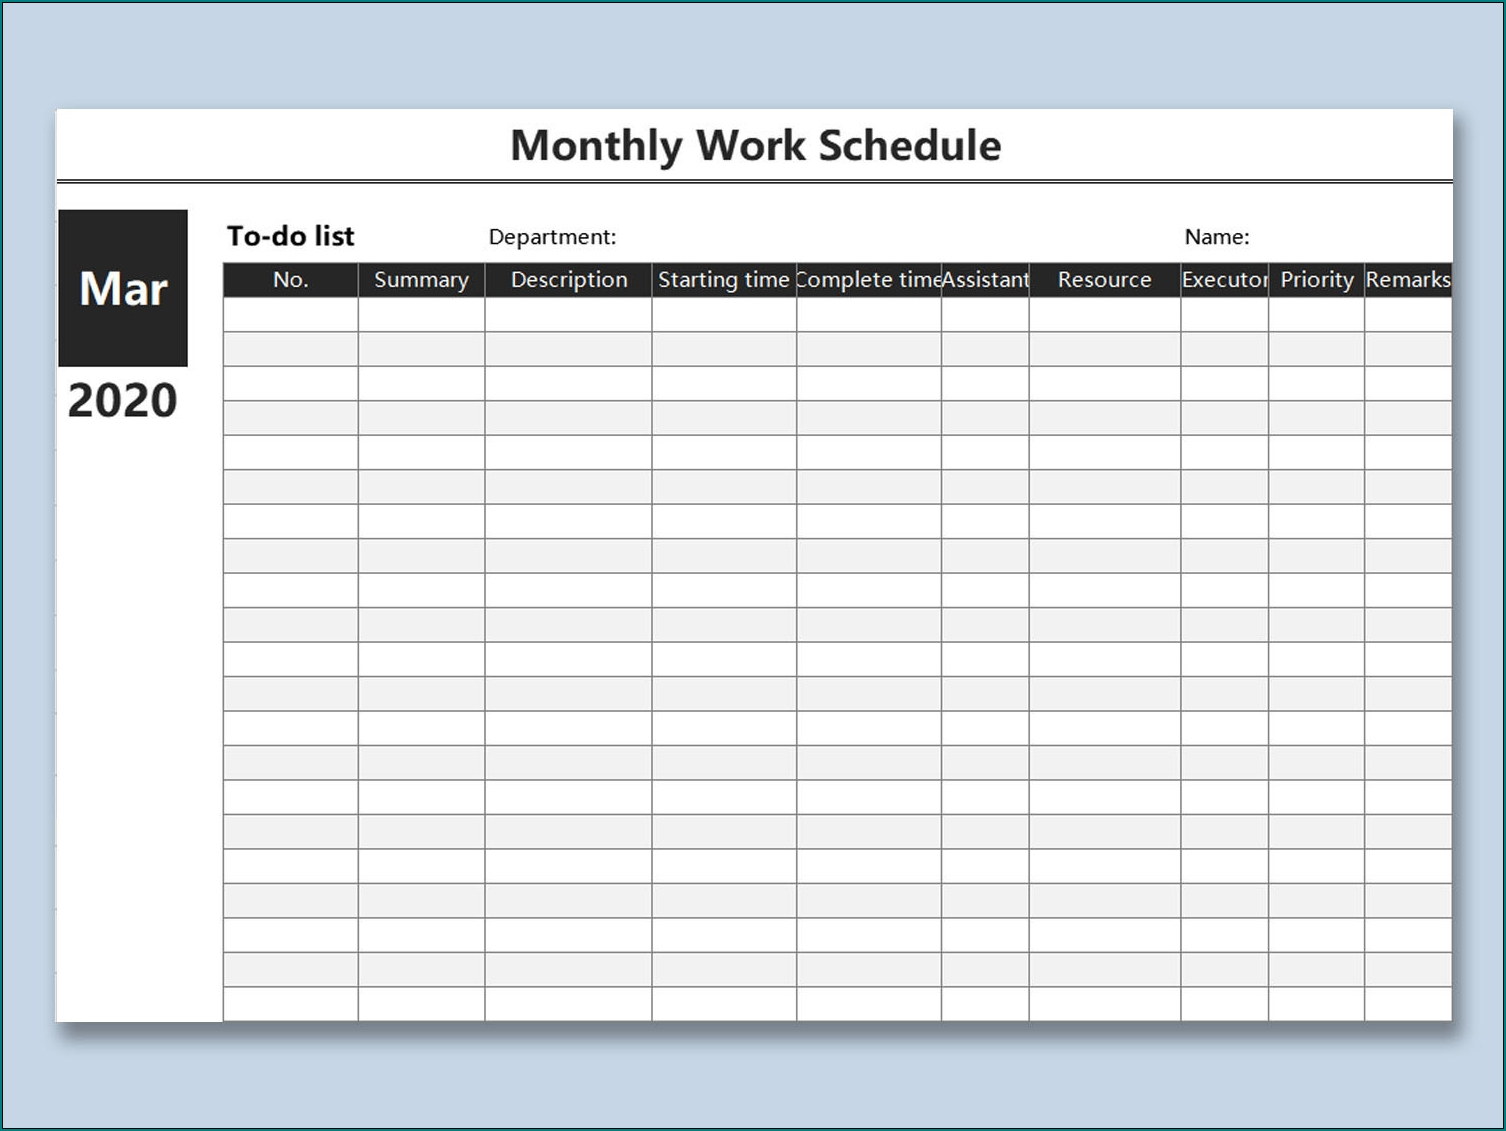 Monthly Employee Schedule Template Pdf | Calendar Template pertaining to Blank Employee Schedule Template